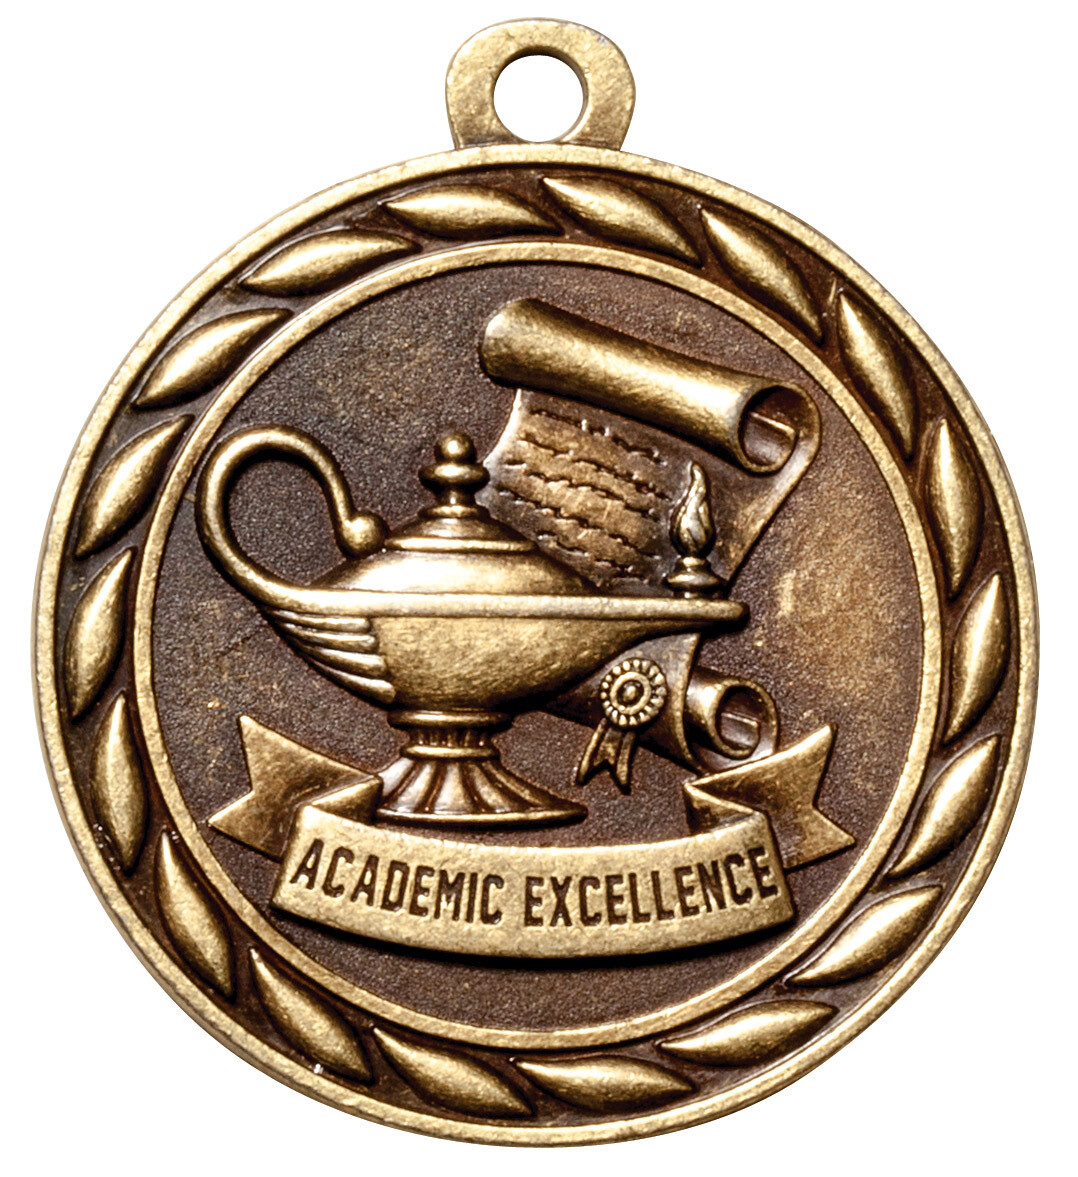 Scholastic Medal Series
ACADEMIC EXCELLENCE